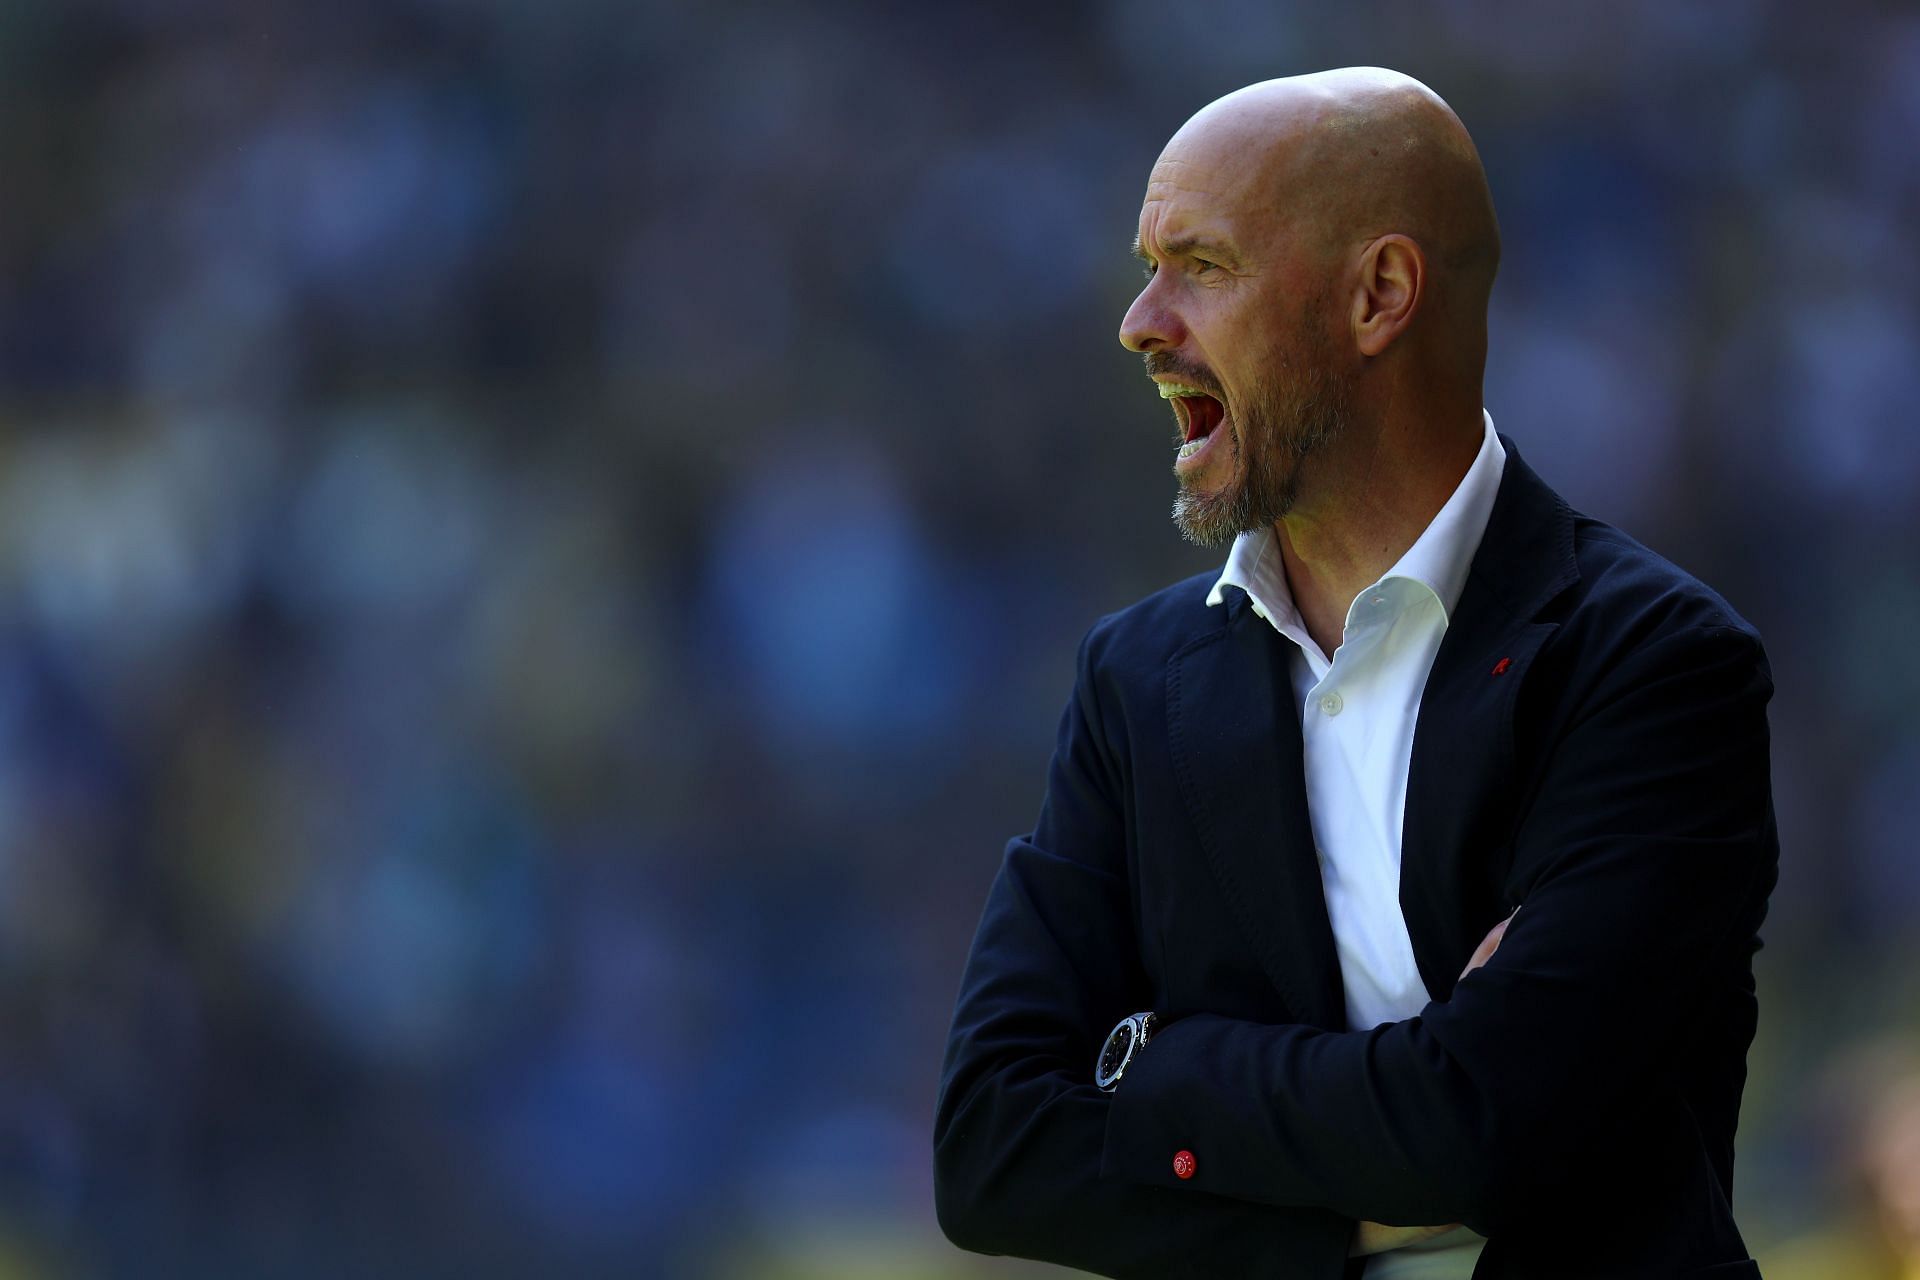 Erik ten Hag is the new boss at Manchester United